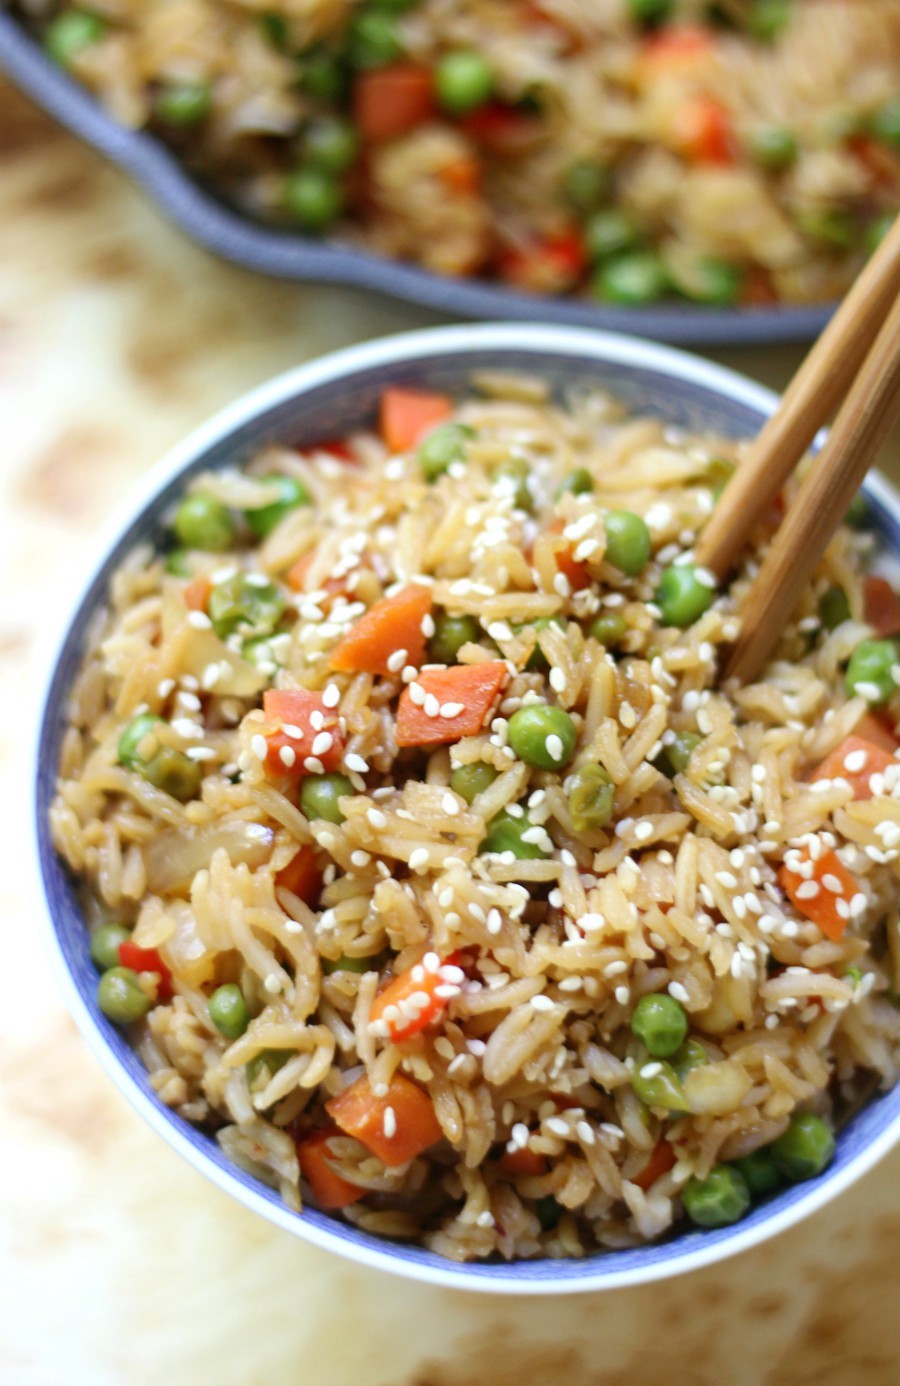 Classic Vegetable Fried Rice (Gluten-Free, Vegan, Allergy-Free) | Strength and Sunshine @RebeccaGF666 A super quick and easy Classic Vegetable Fried Rice recipe so you don't need to order takeout! It's gluten-free, vegan, top 8 allergy-free, healthy, and full of veggies! A perfect side dish for using leftover rice and transforming it into a delicious lunch or dinner! #friedrice #glutenfree #soyfree #vegan #nutfree #takeout #strengthandsunshine